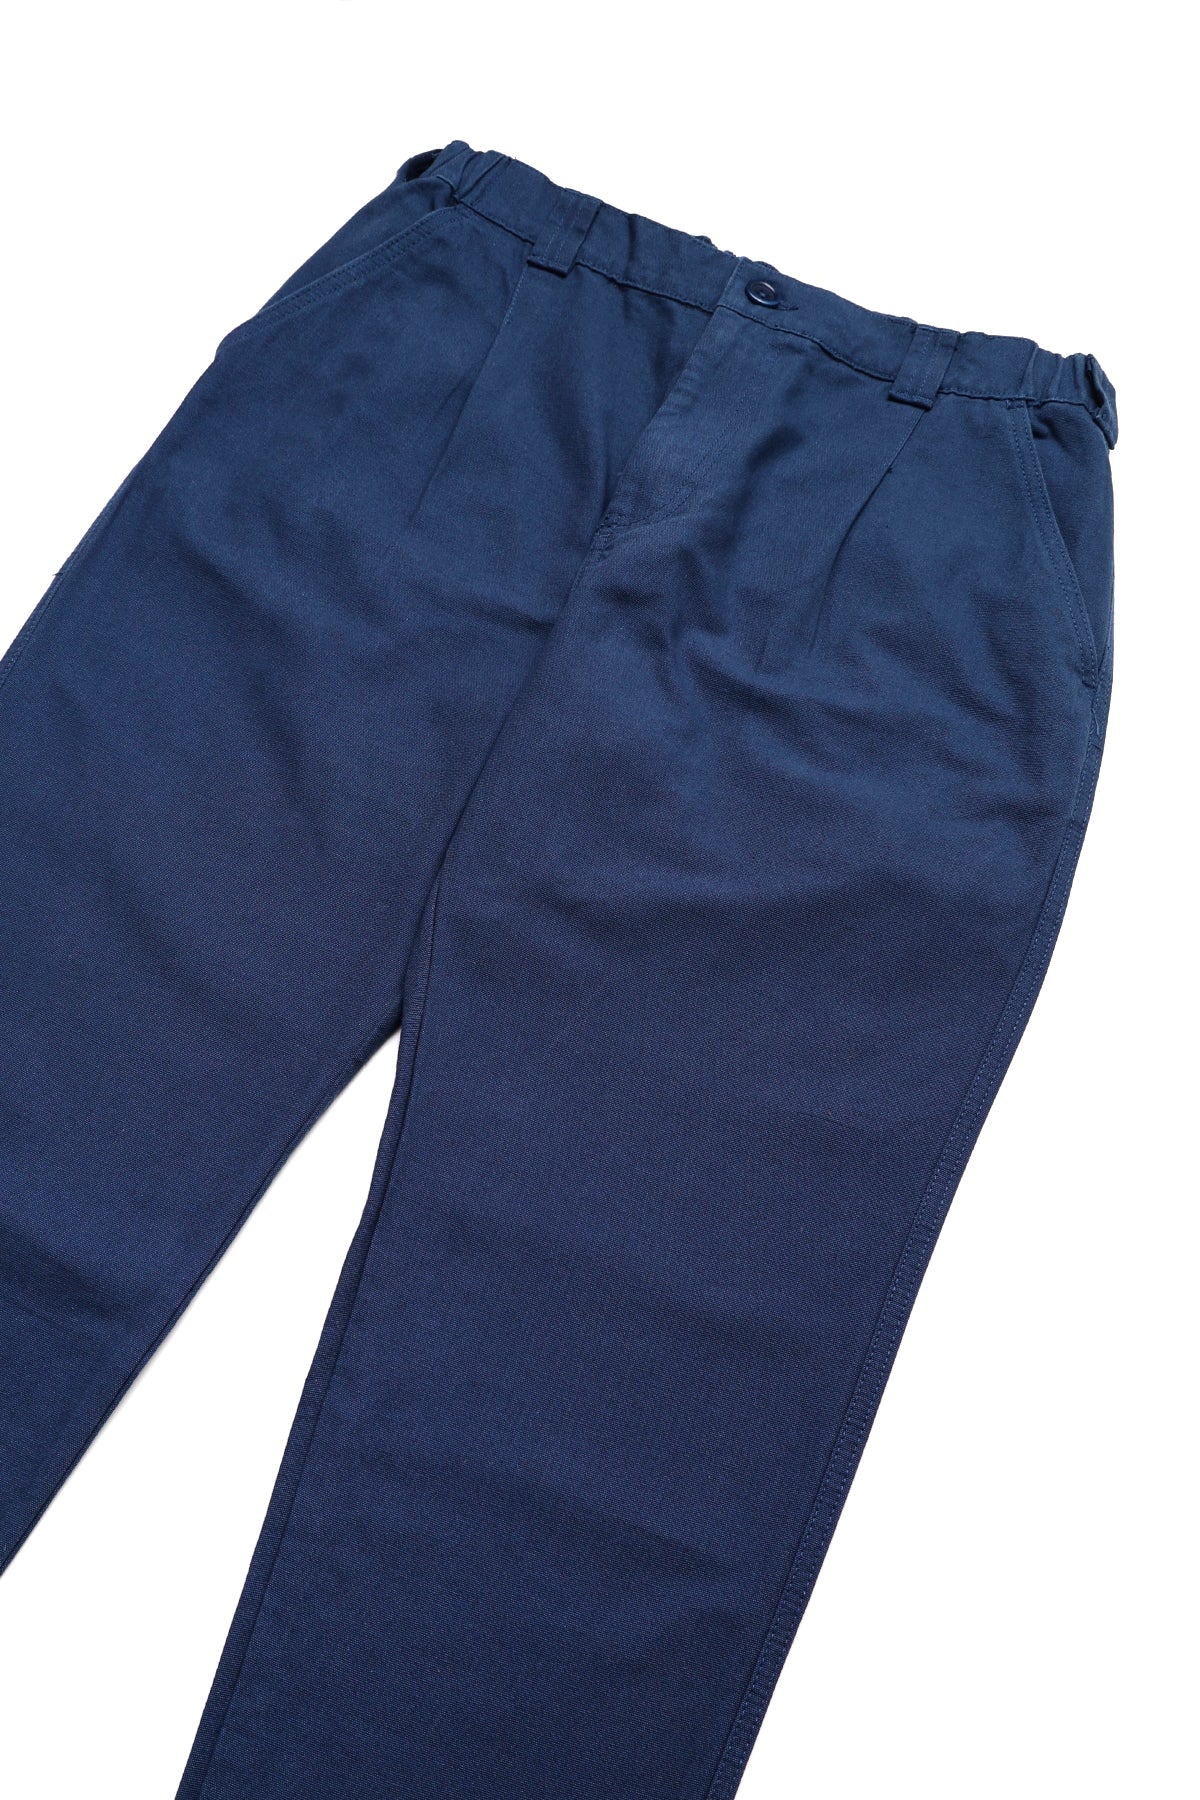 Service Works - Canvas Waiters Pant - Navy